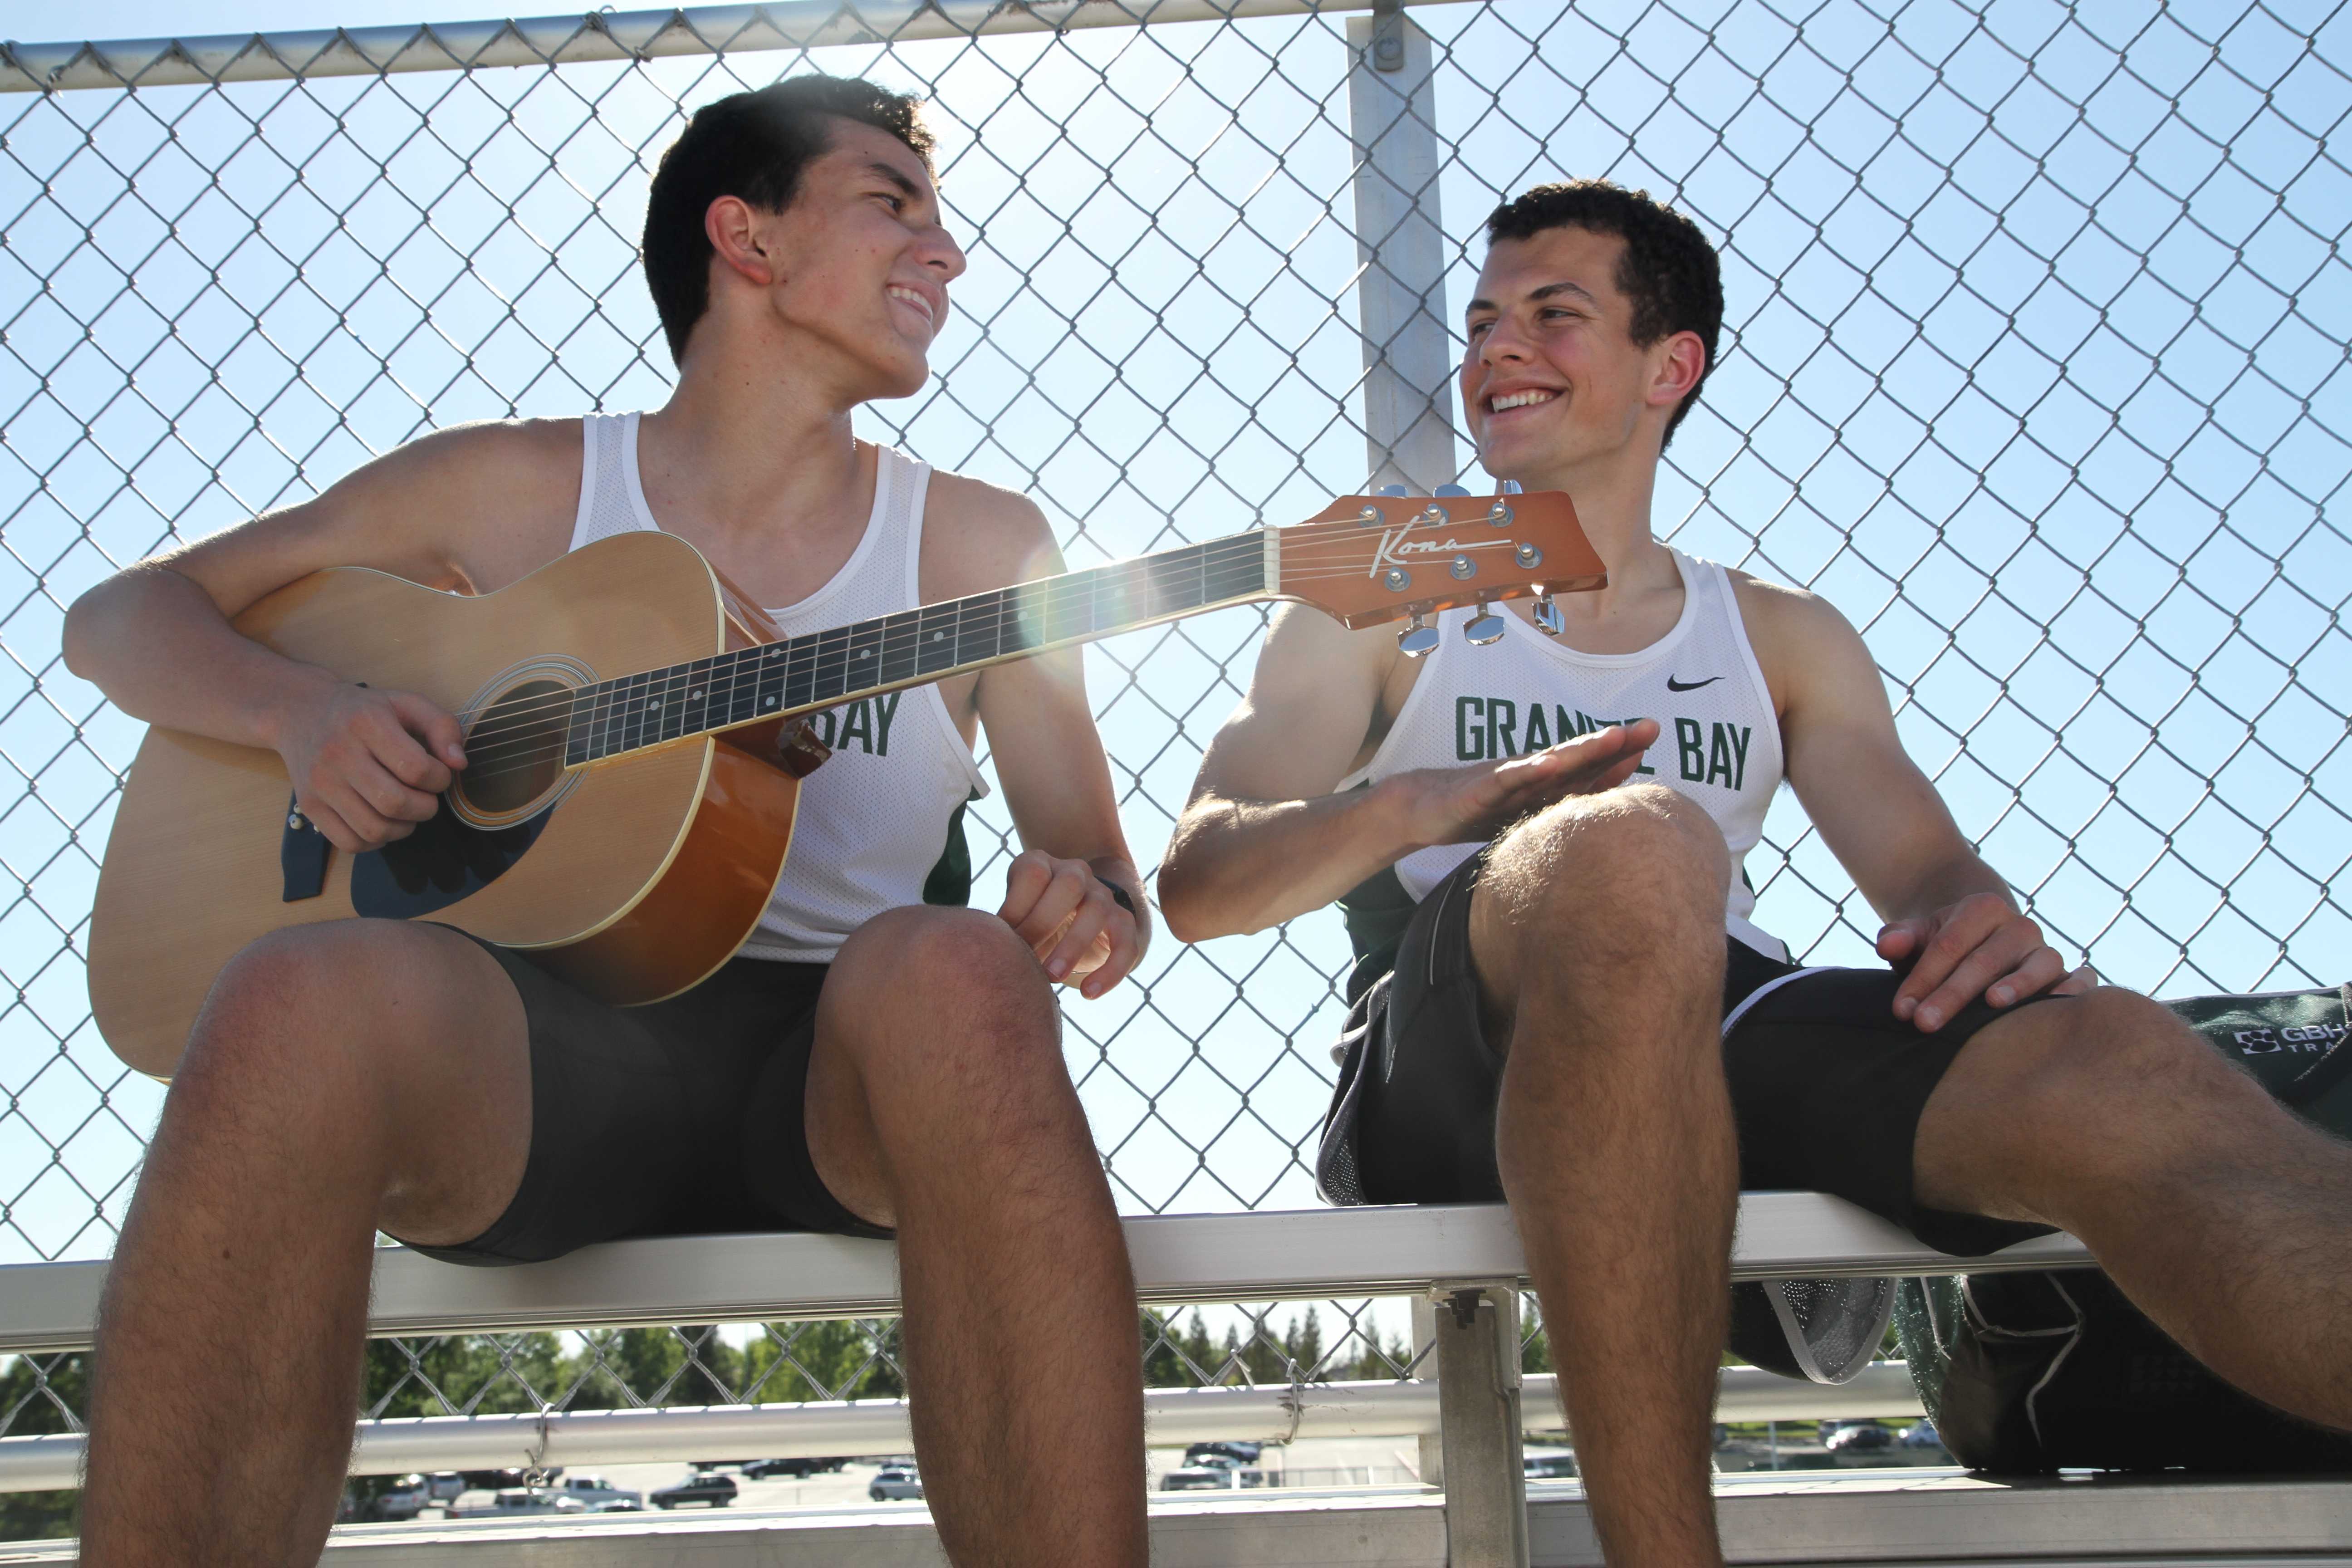 BETWEEN EVENTS While waiting for the two mile, during the home meet on April 29, junior Josiah Luna plays “Through the Fire and Flames” by Dragonforce, which surprises Junior Nathan Dell’Orto. According to Dell’Orto, “Through the Fire and Flames” is a really hard piece to play on the  guitar and for Luna to be able to play it, was fascinating. “It’s the song that everything gets compared to; if you can play is you’re basically a pro guitarist,” Dell’Orto said. Photo by Janelle Cruz